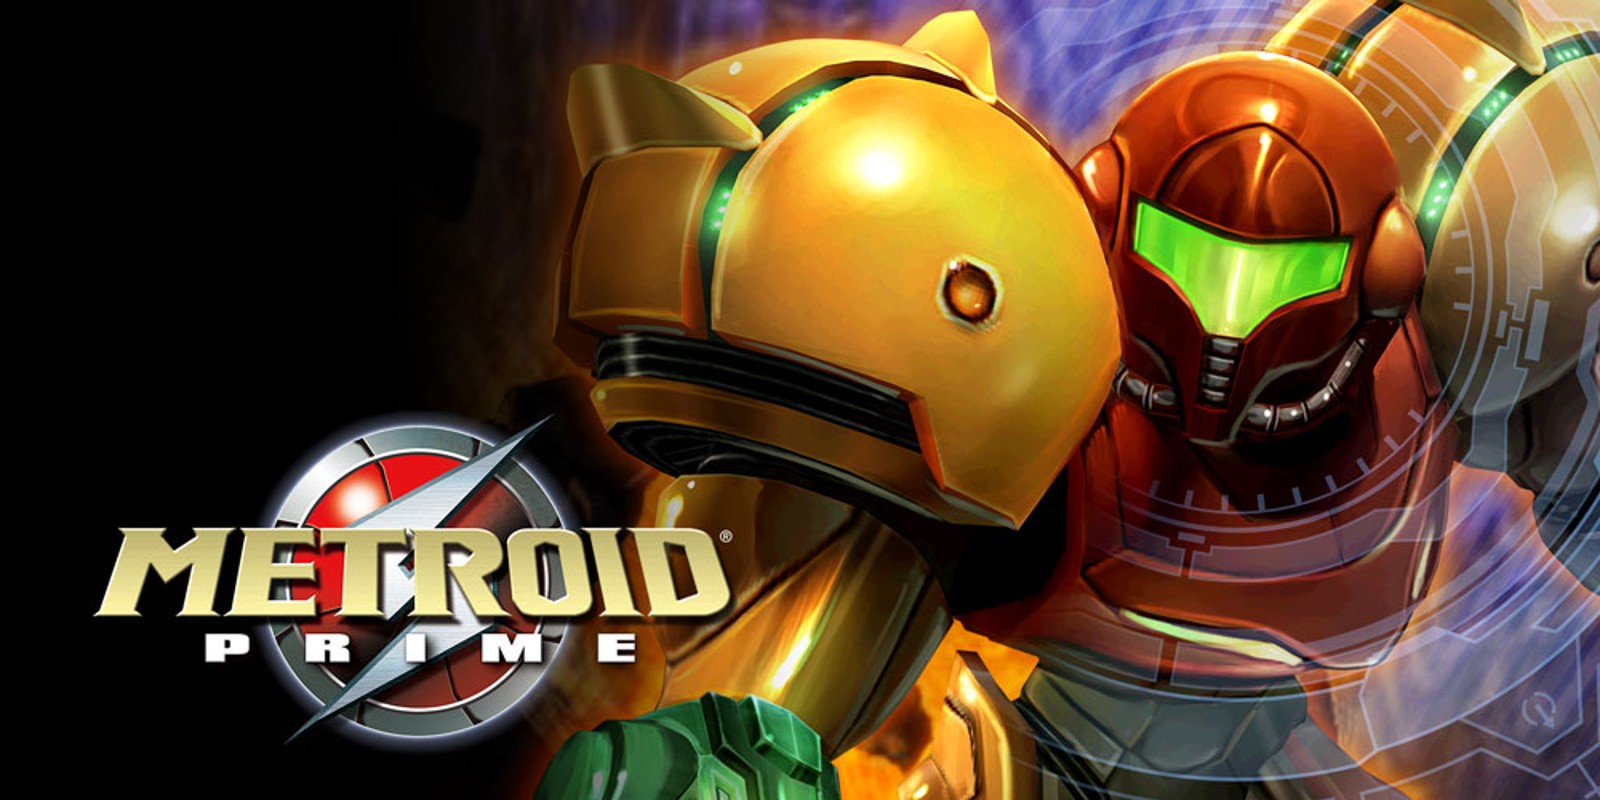 Metroid Prime 4: is it finally the right time?